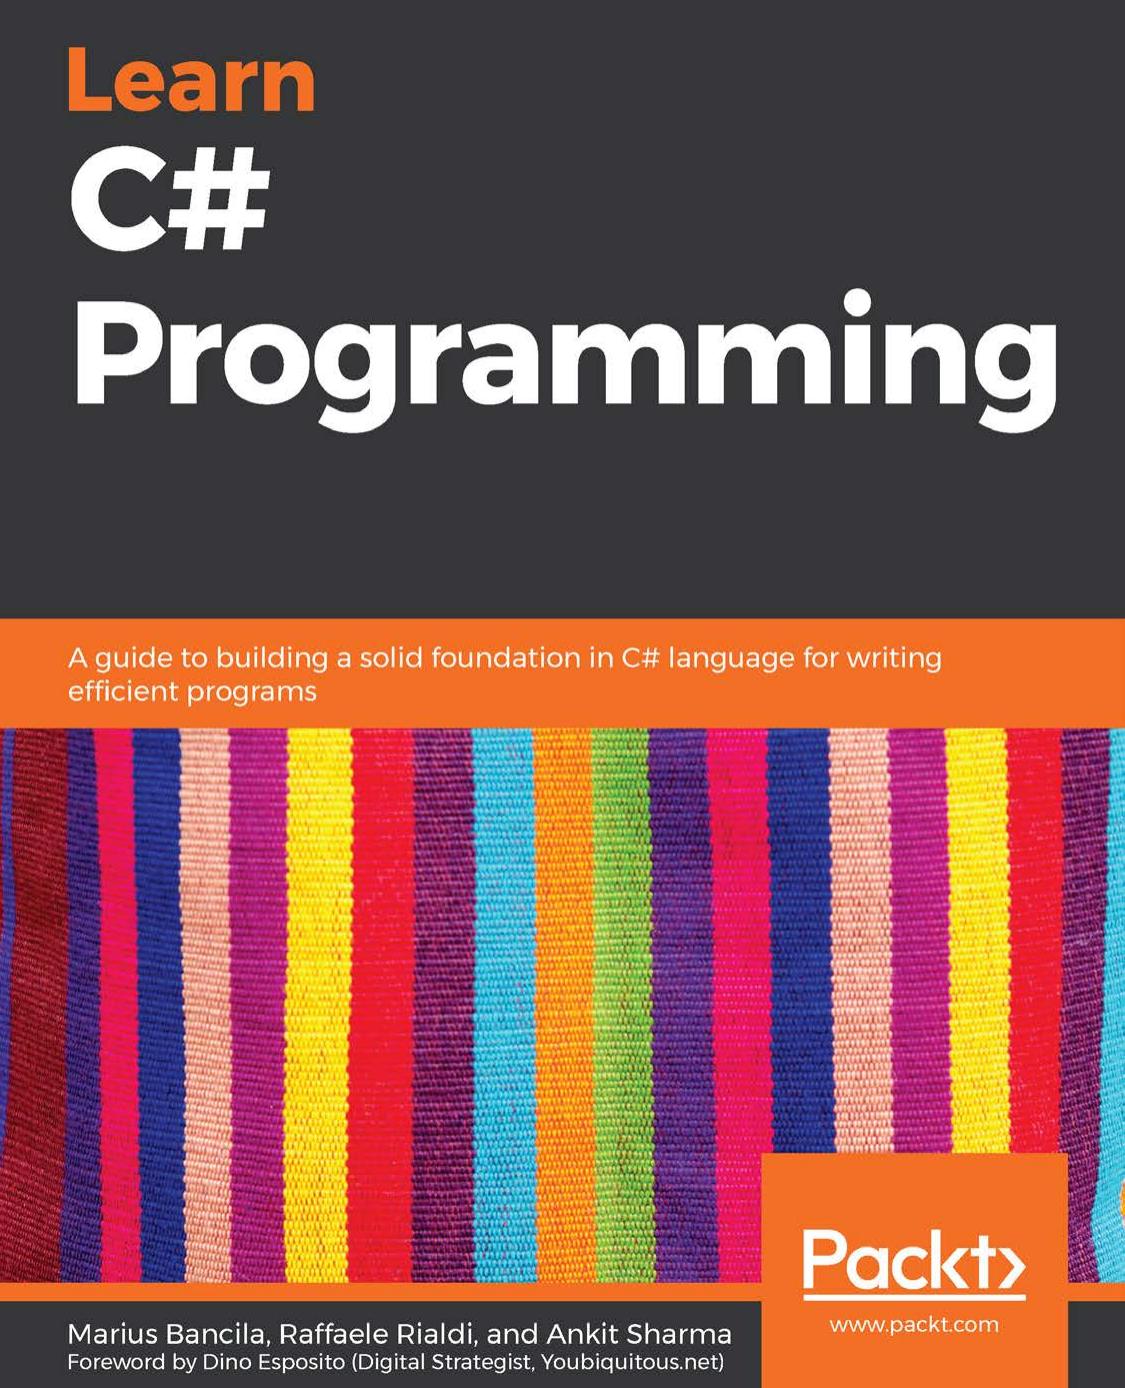 Learn C# Programming: A Guide to Building a Solid Foundation in C# Language for Writing Efficient Programs